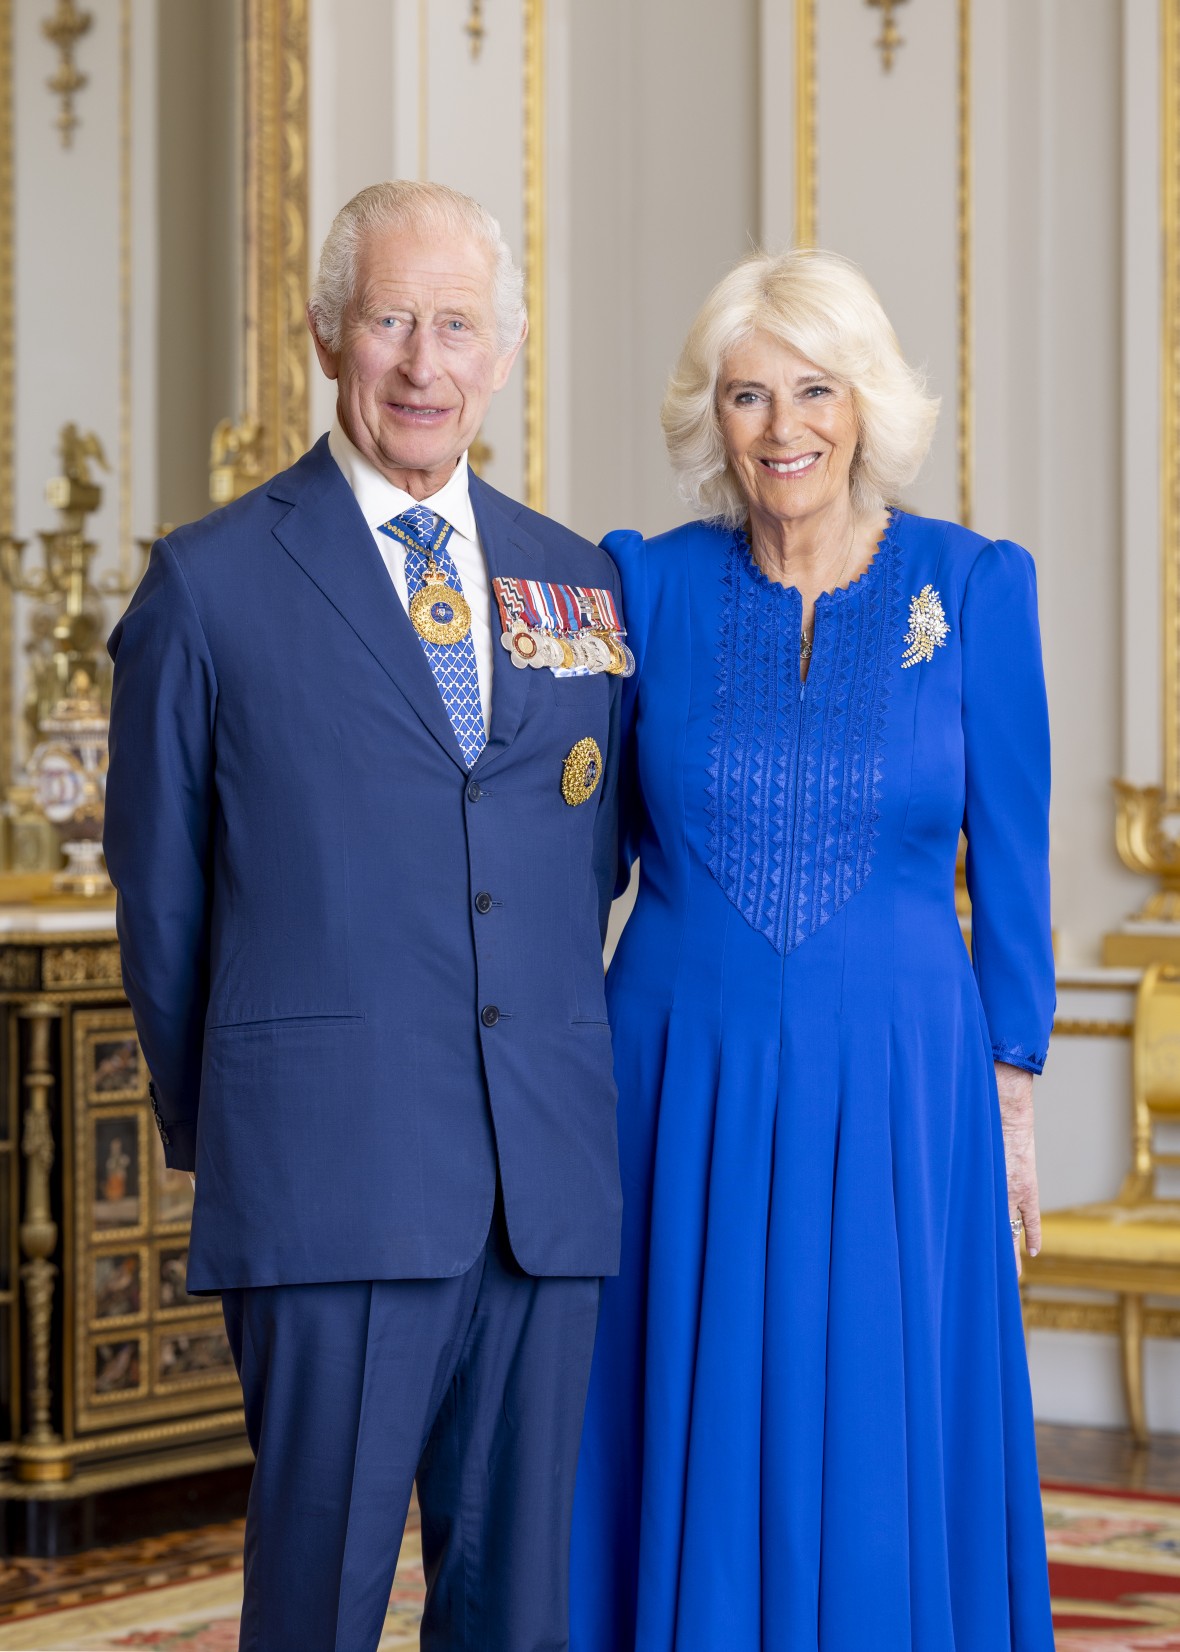 His Majesty King Charles III and Queen Camilla (three quarter length version)